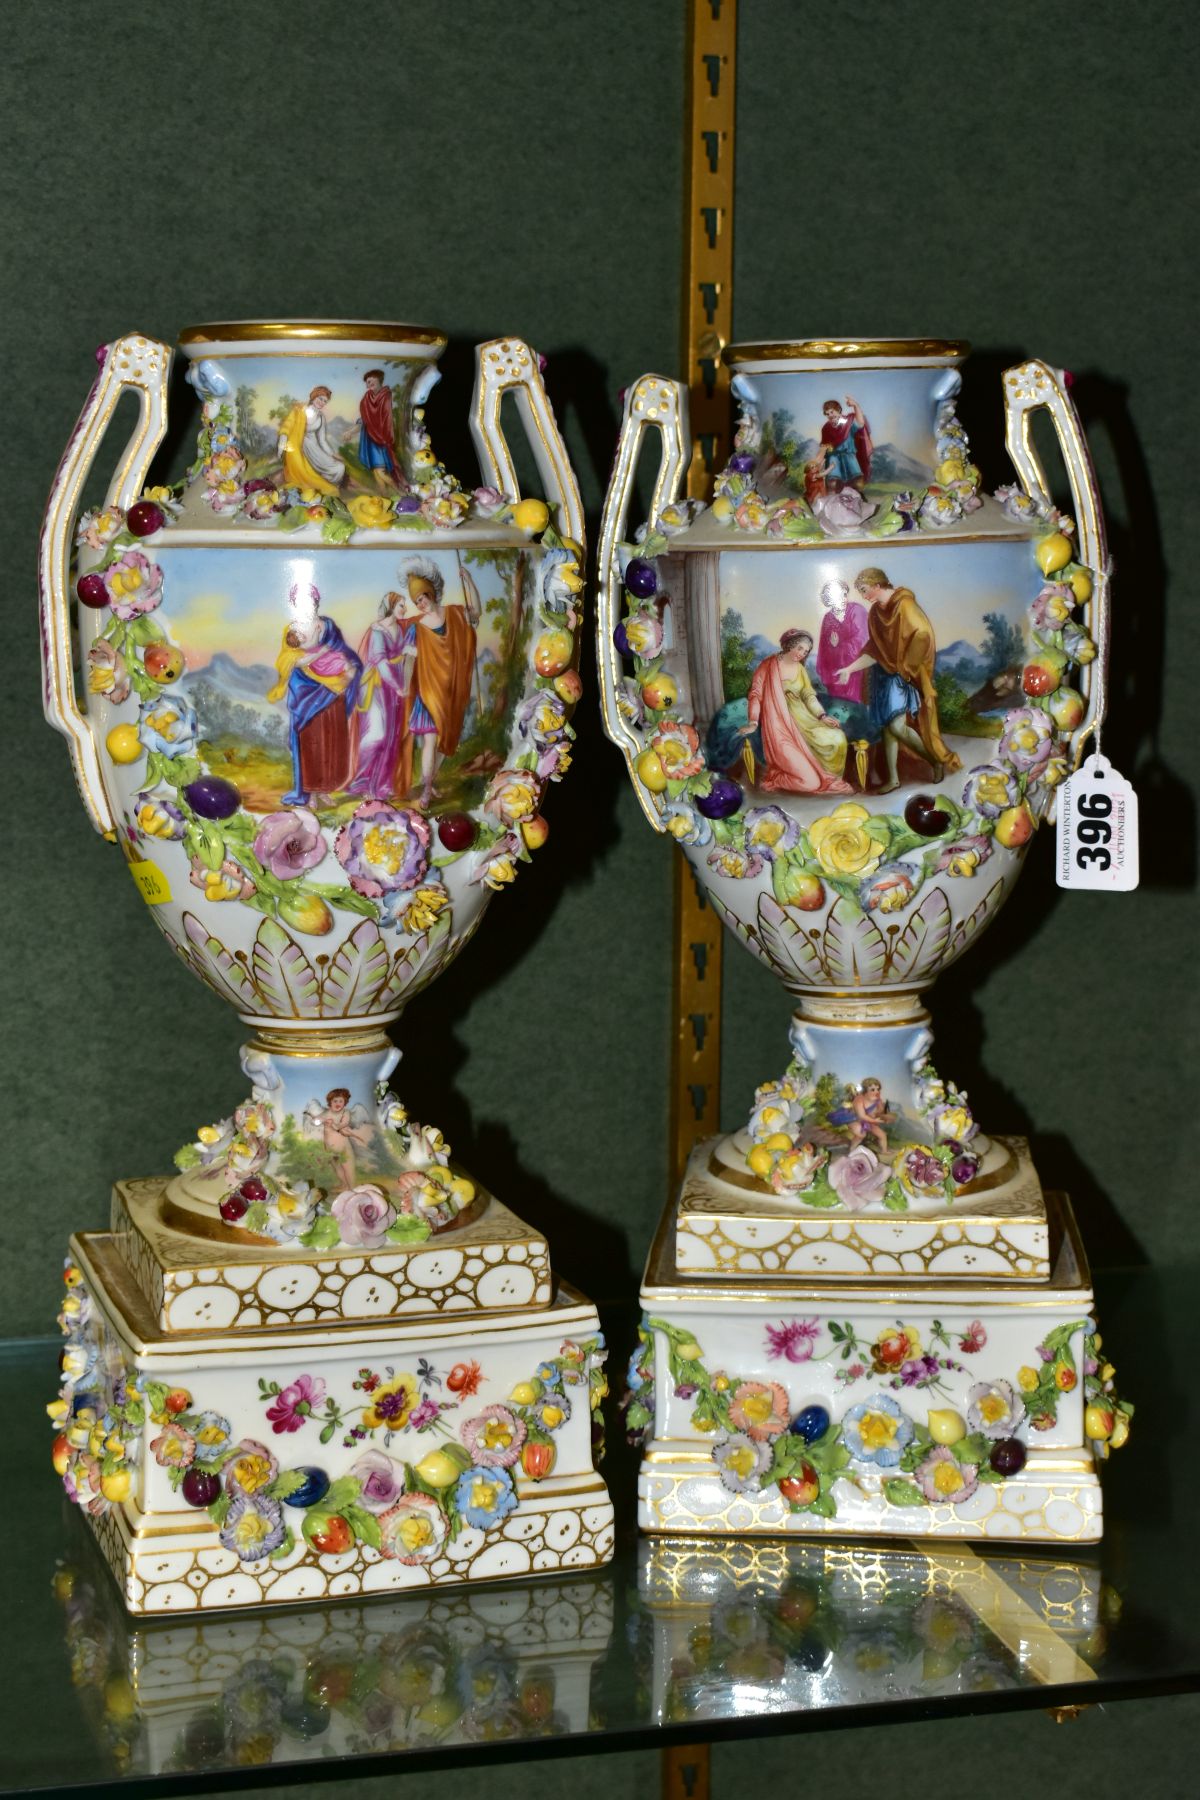 A PAIR OF EARLY 20TH CENTURY POTSCHAPPEL PORCELAIN TWIN HANDLED FLORAL ENCRUSTED VASES ON PLINTHS,